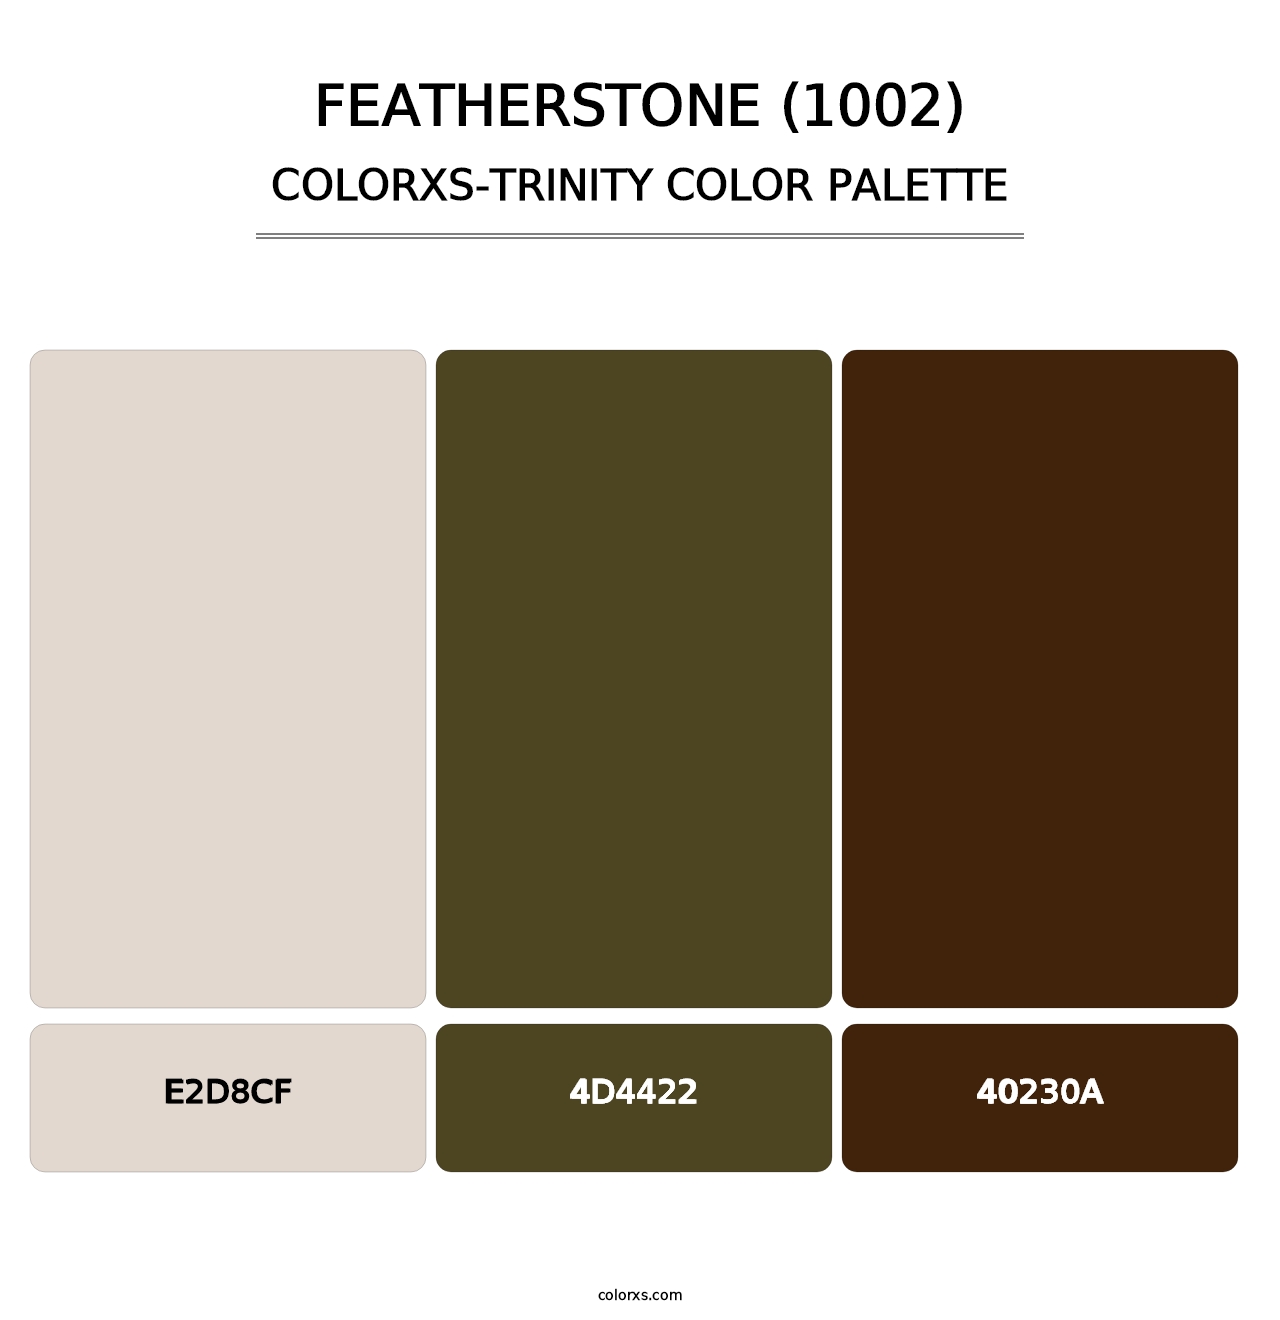 Featherstone (1002) - Colorxs Trinity Palette